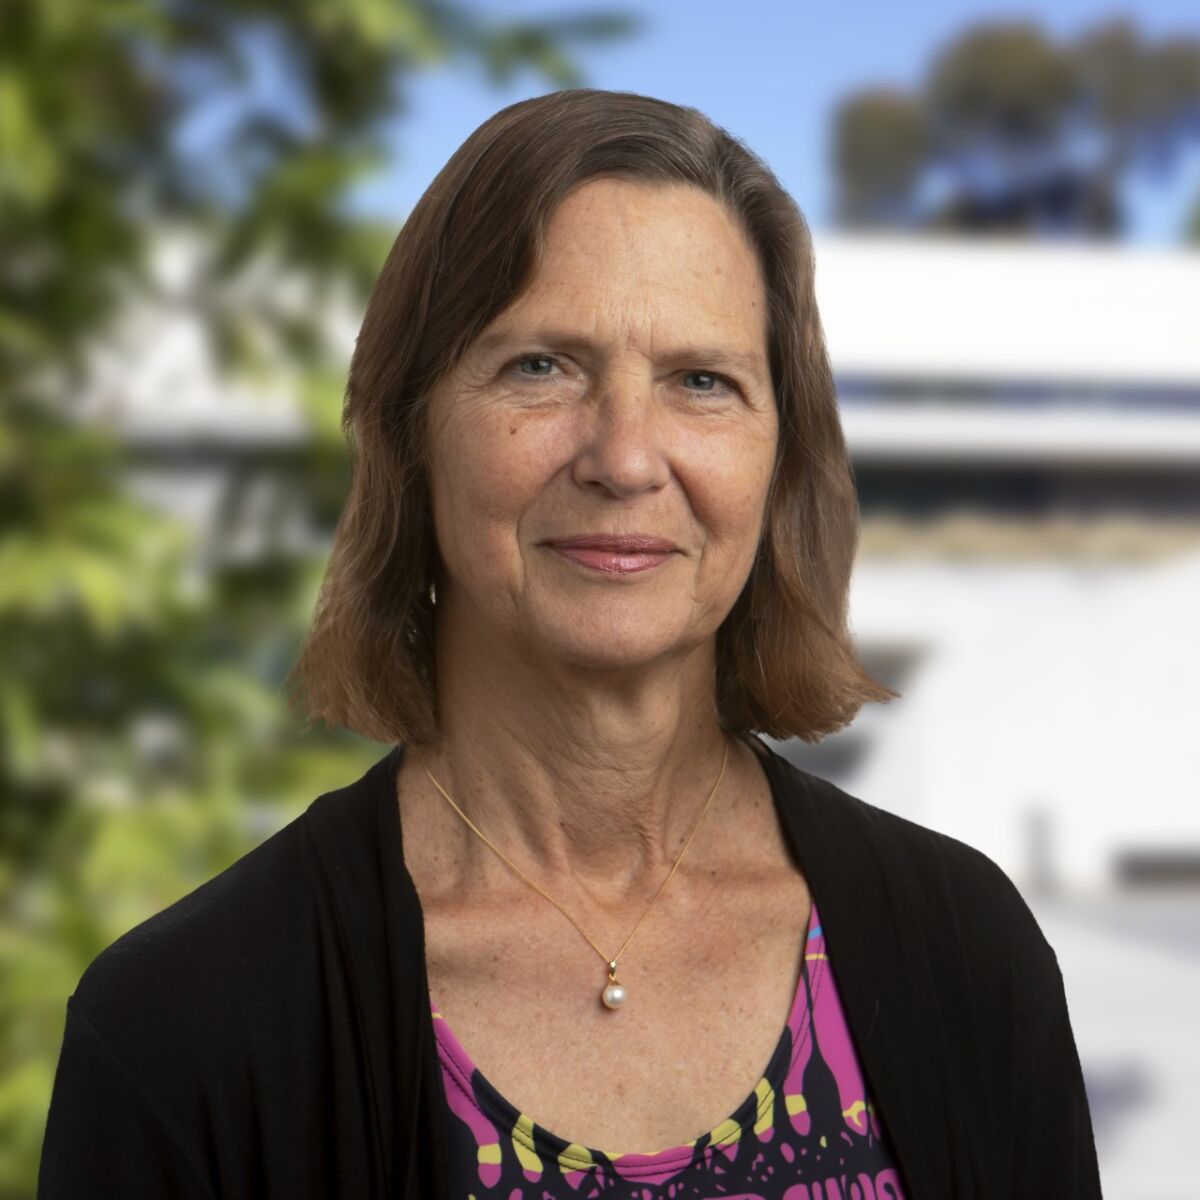 Hollis Cline, who leads the Dorris Neuroscience Center at Scripps Research in La Jolla